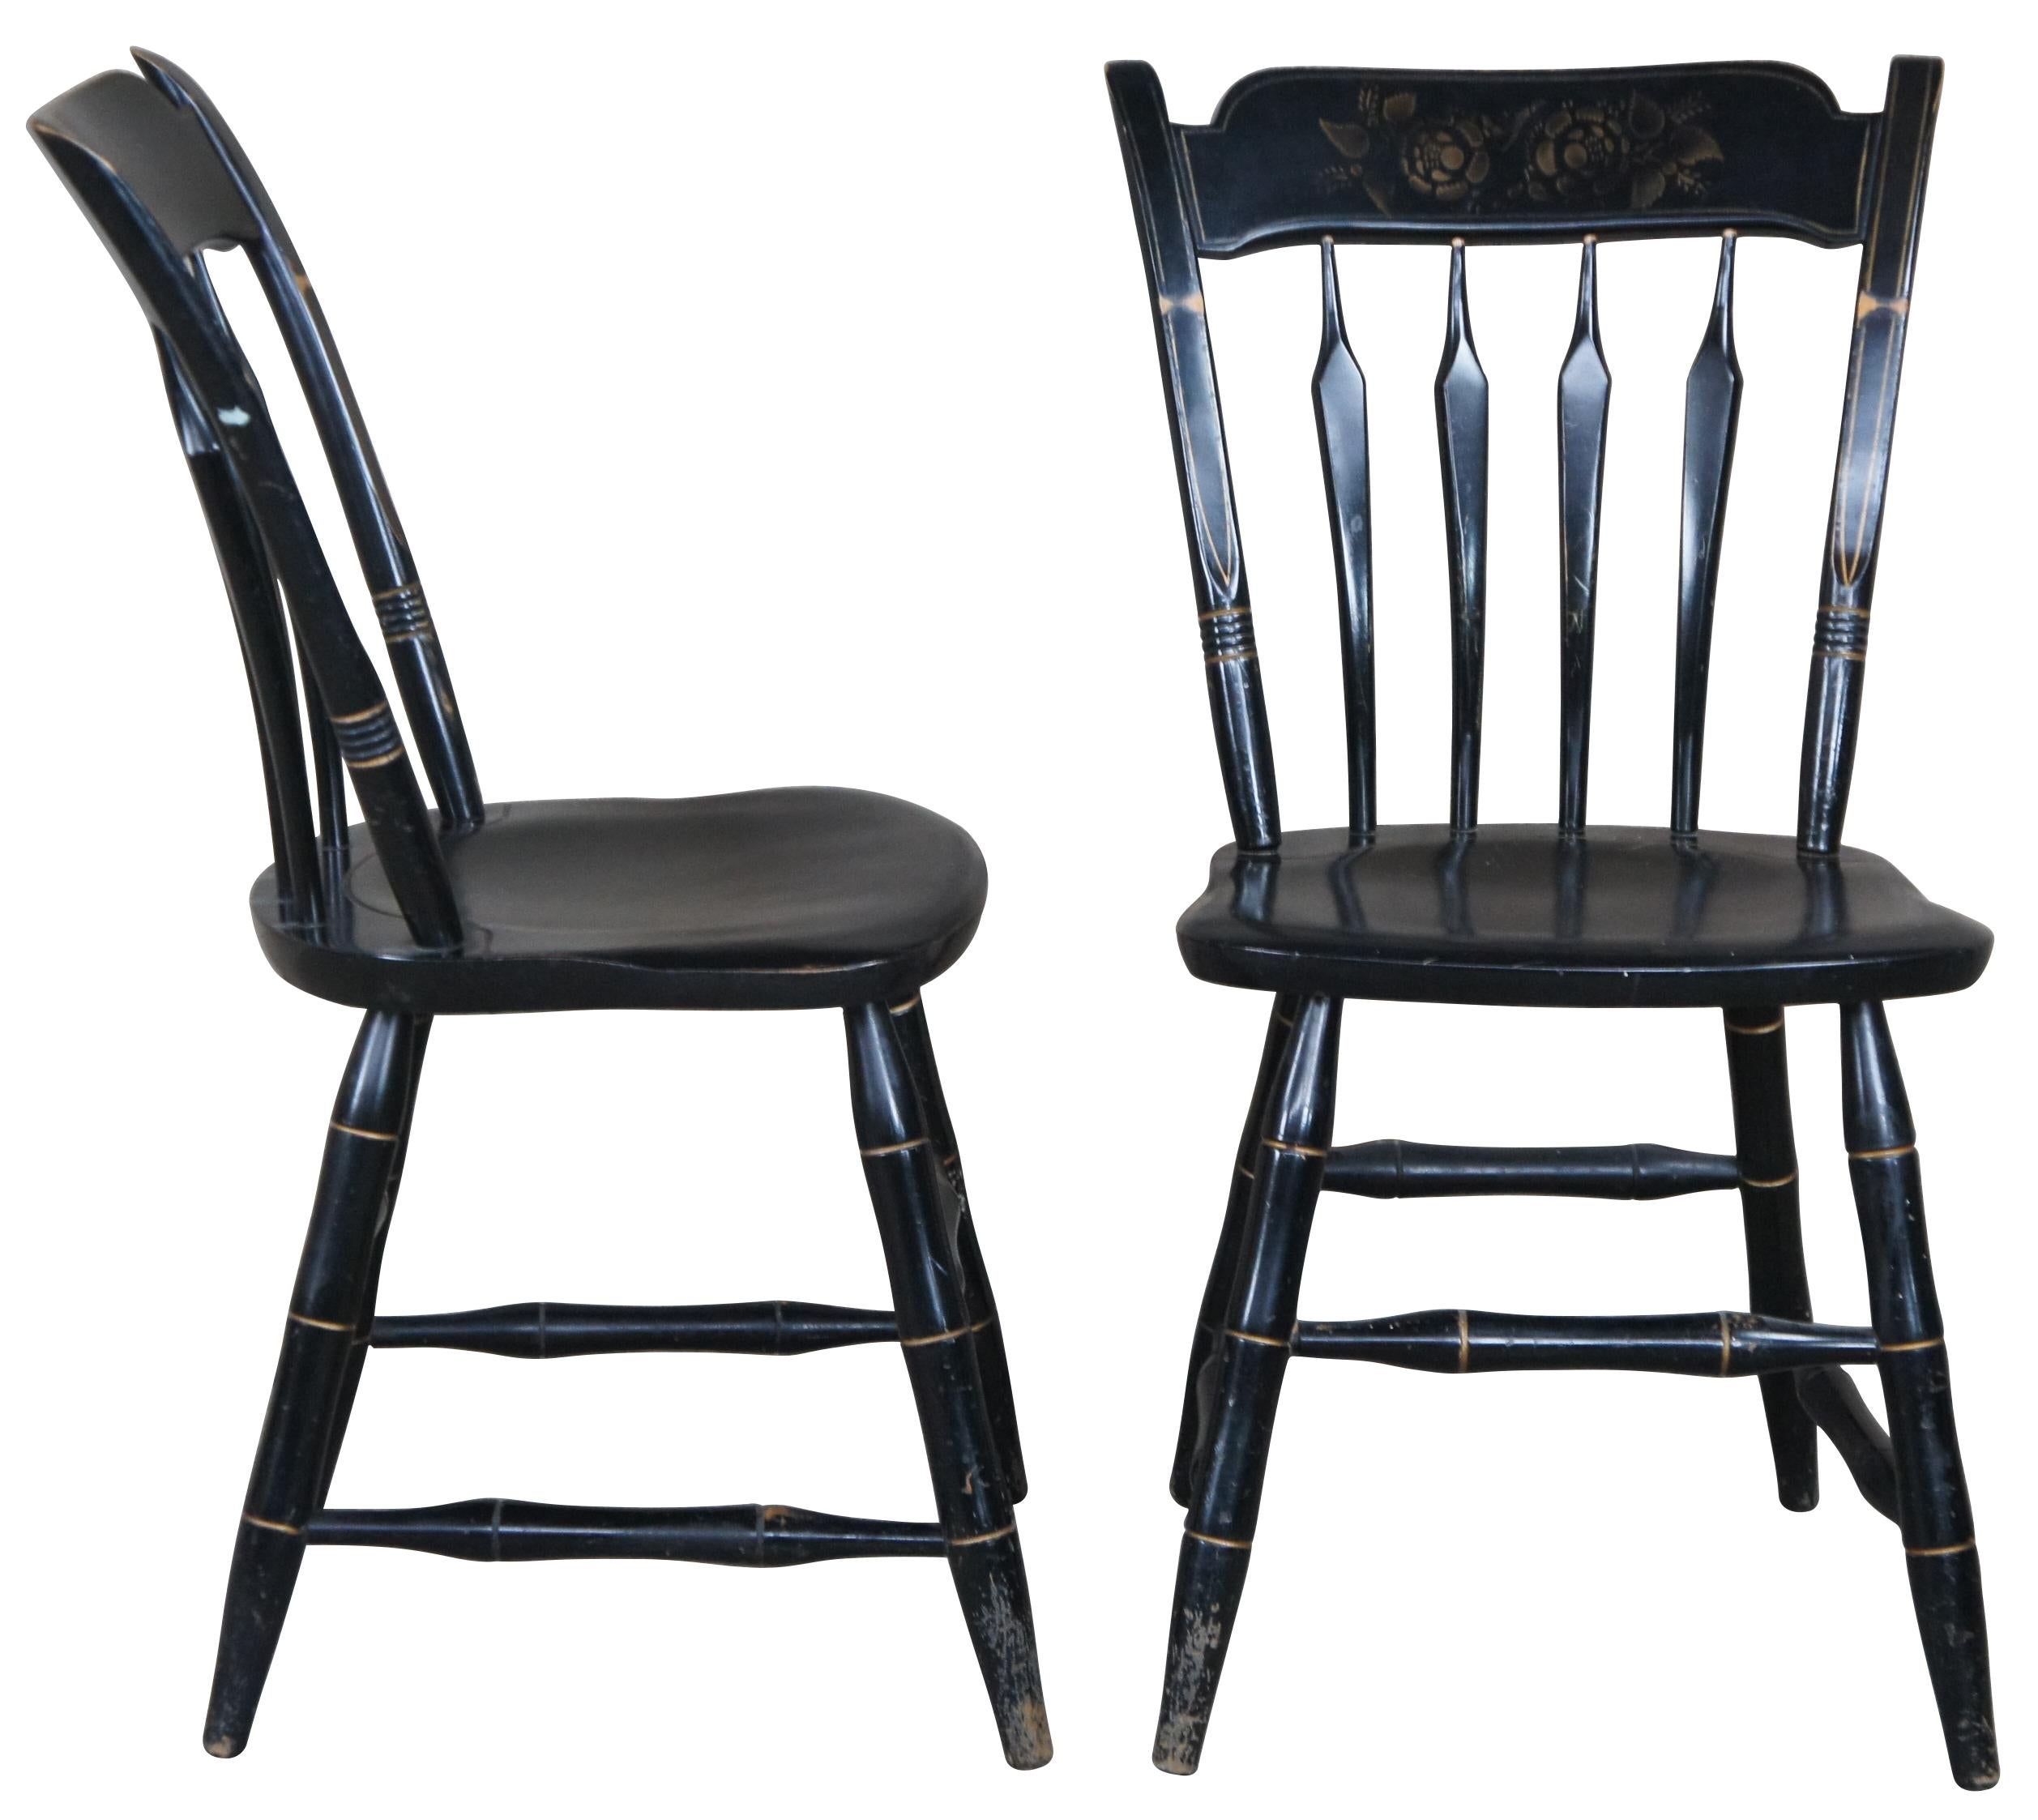 2 S. Bent & Bros Hitchcock style colonial windsor thumb back side chairs. Made from maple with a black finish, stenciled back and gold trim.
S. Bent & Brothers, Inc out of Gardner Ma. was started in 1867 and made colonial chairs, rockers,